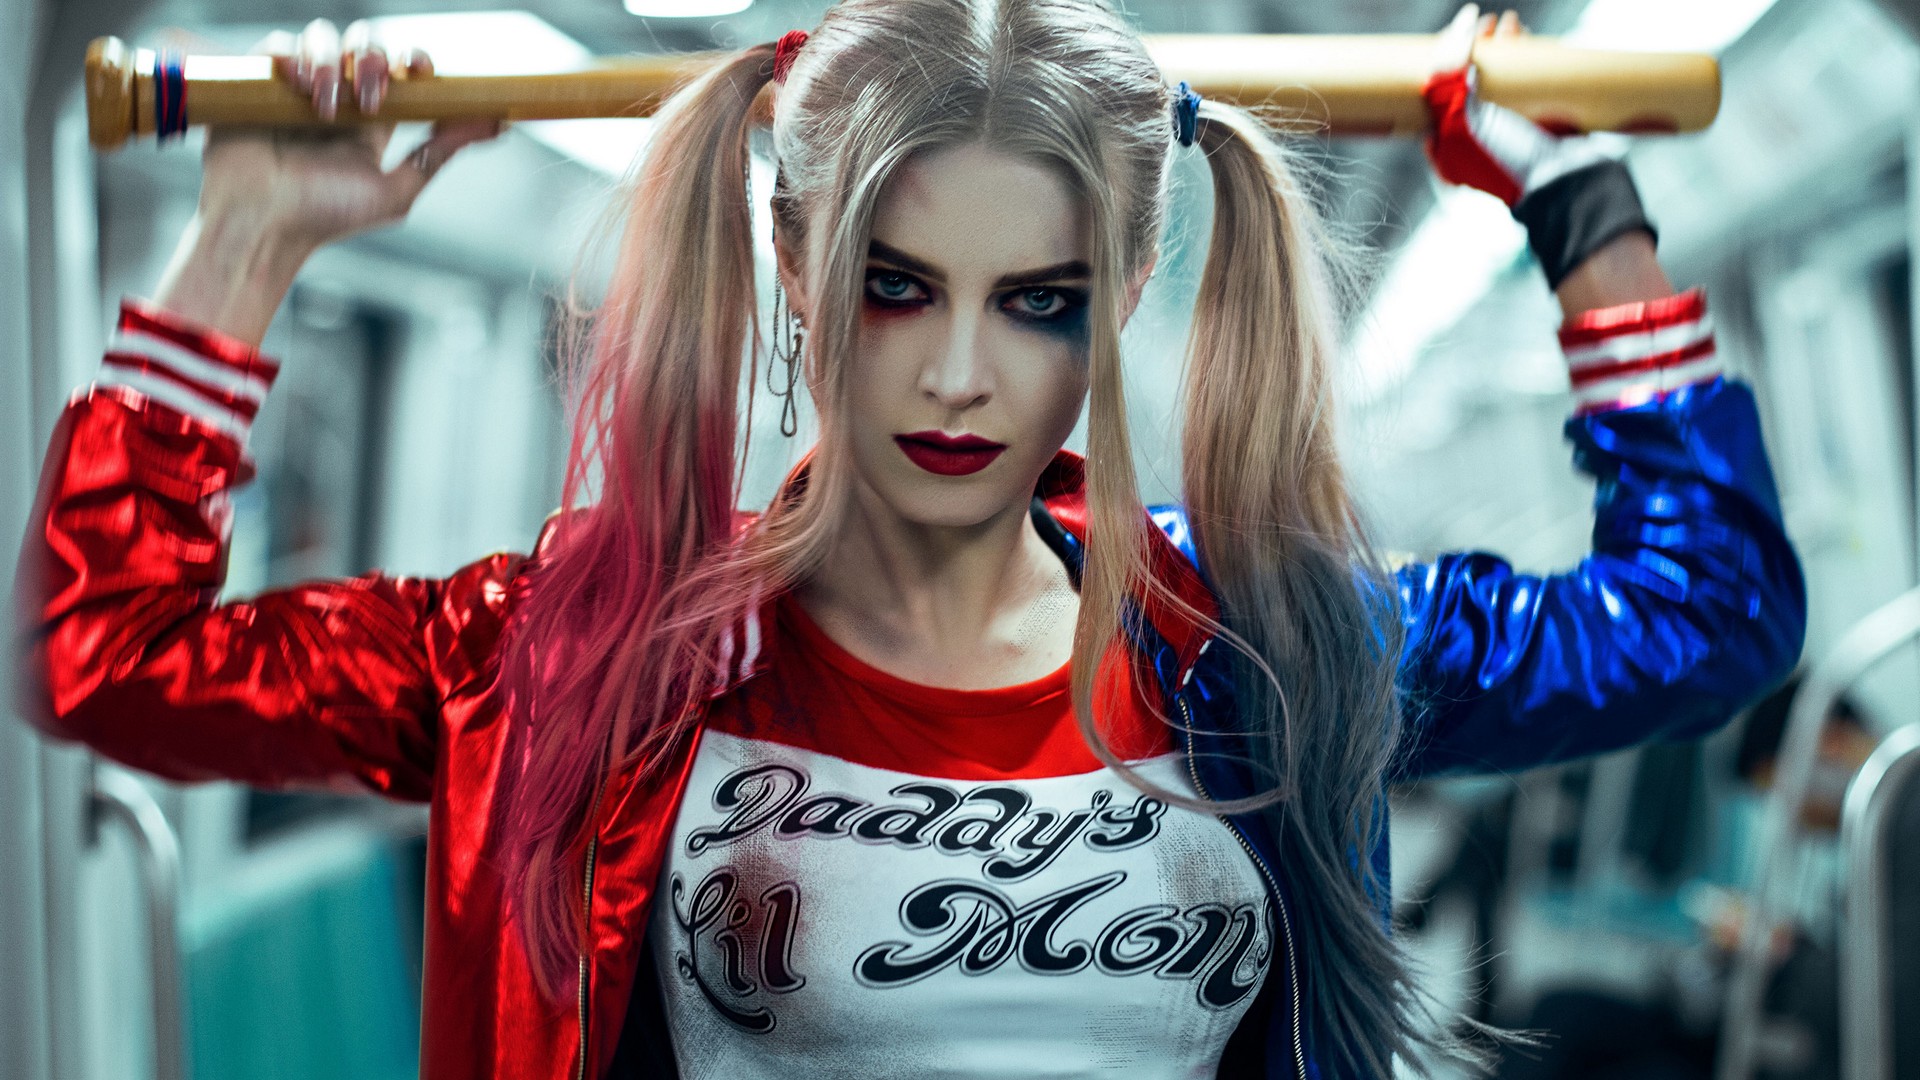 Harley Quinn Makeup Wallpaper with resolution 1920X1080 pixel. You can use this wallpaper as background for your desktop Computer Screensavers, Android or iPhone smartphones